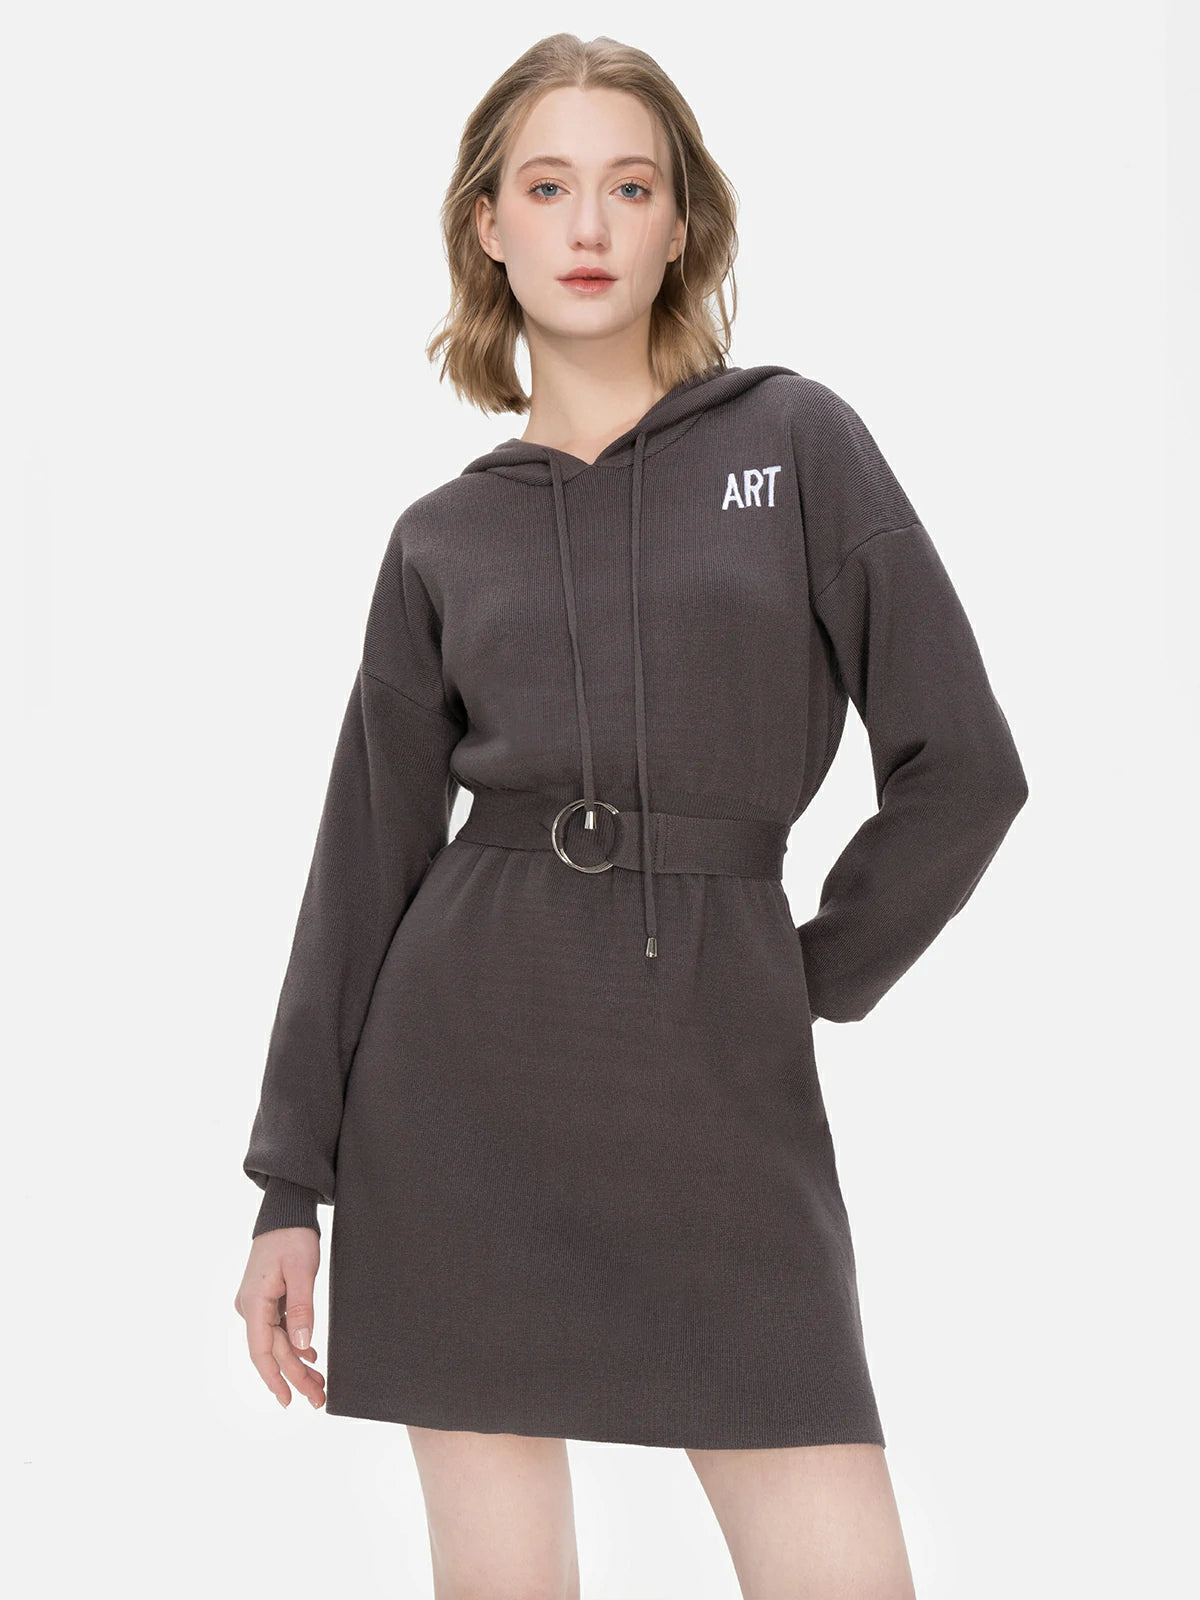 Contemporary silhouette Hooded knit dress